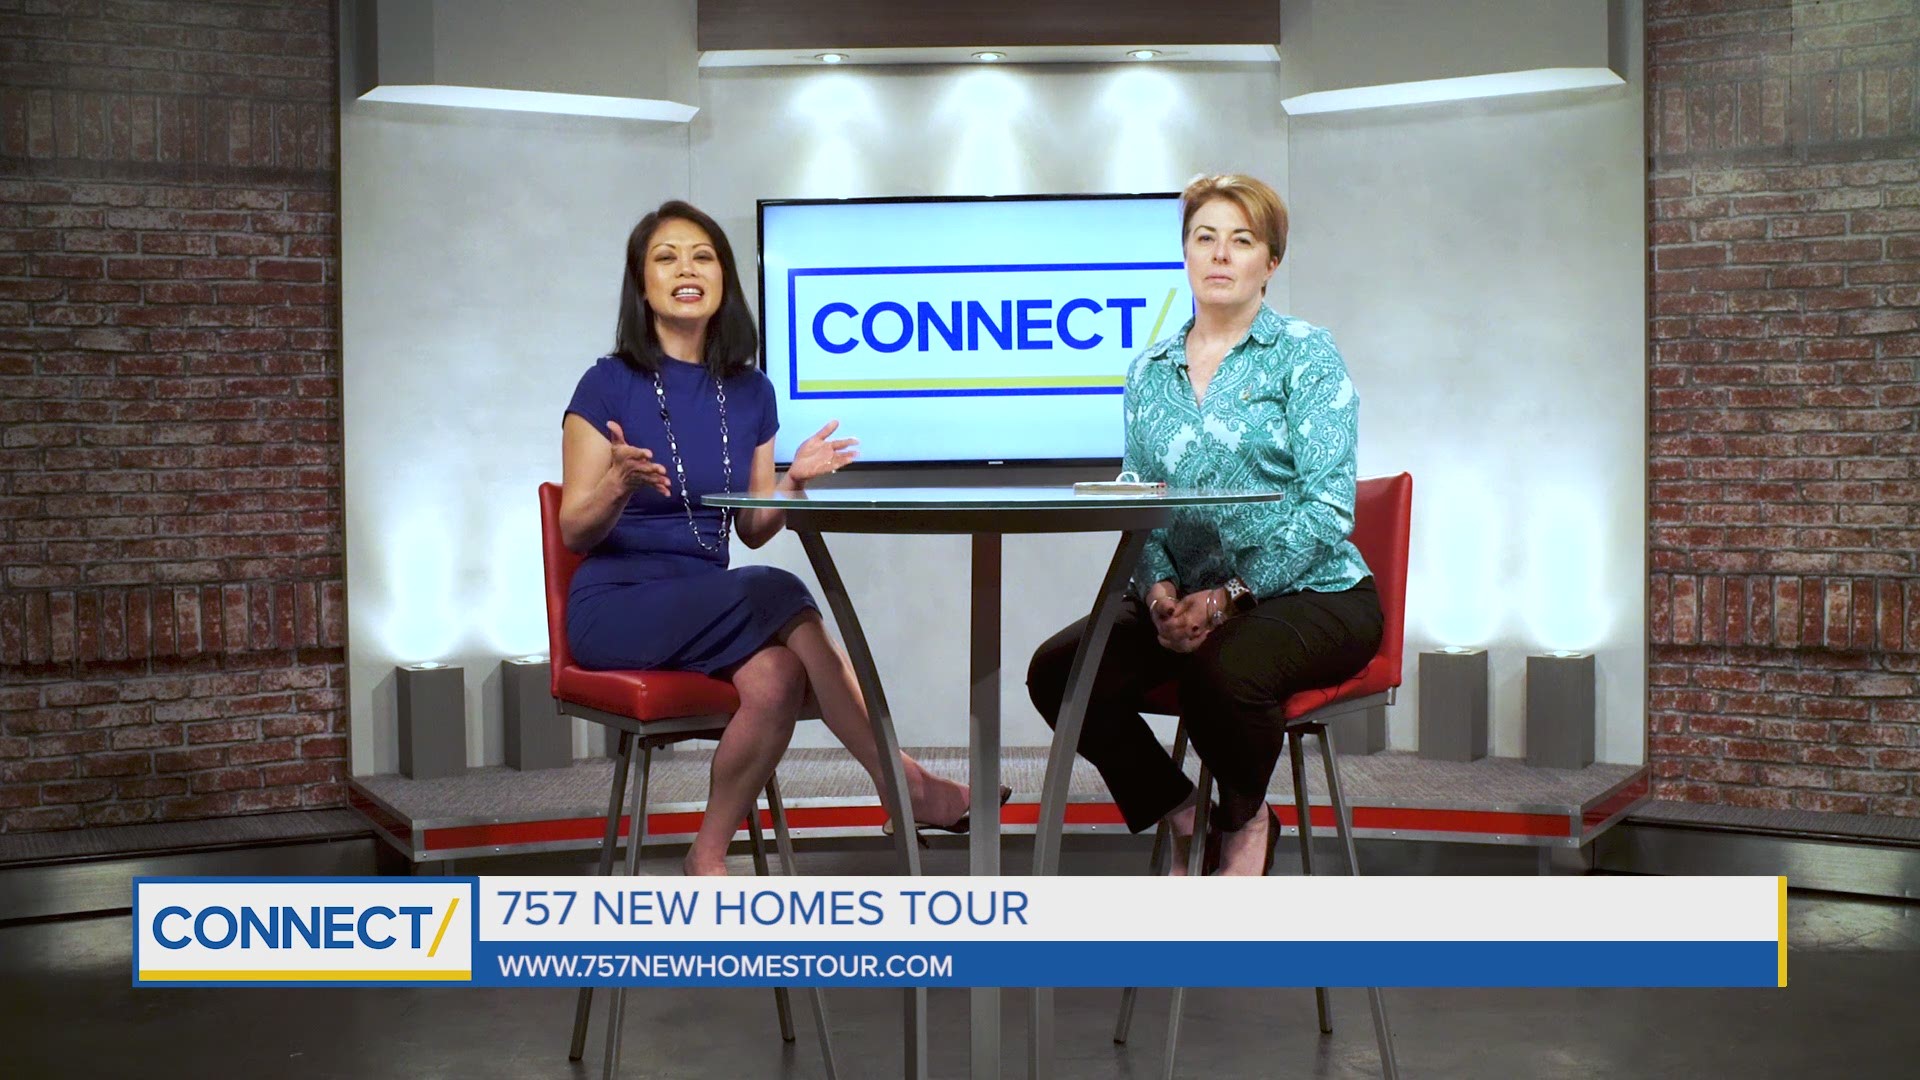 Whether you're looking for a new home, design inspiration, or just enjoy viewing houses, the 757 New Homes Tour will give you a one of a kind experience.